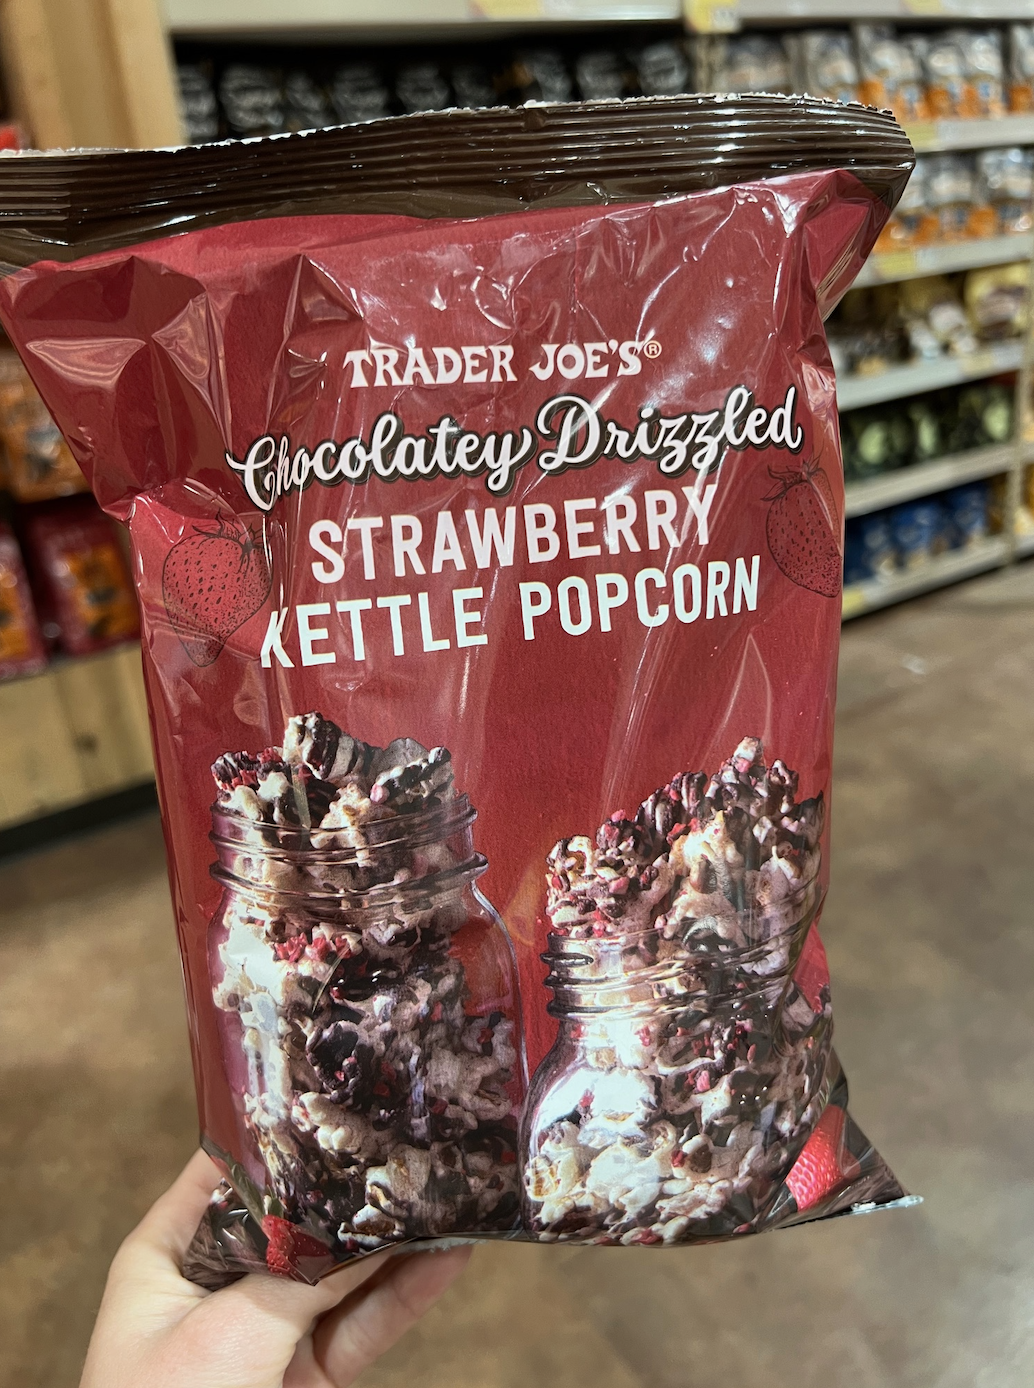 Hand holding a bag of Trader Joe&#x27;s Chocolatey Drizzled Strawberry Kettle Popcorn